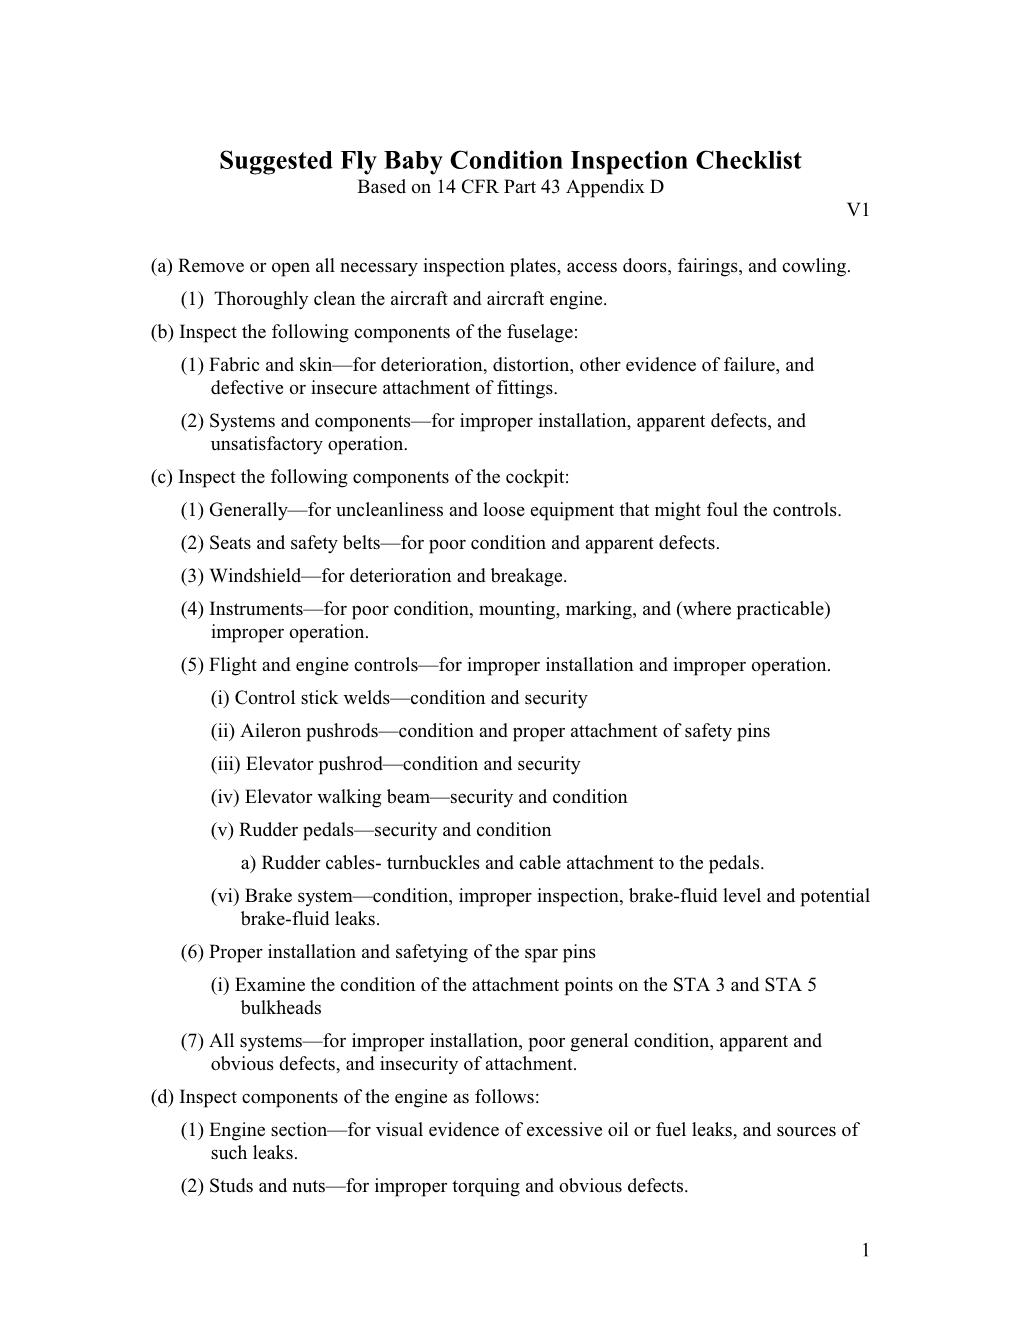 Suggested Fly Baby Condition Inspection Checklist